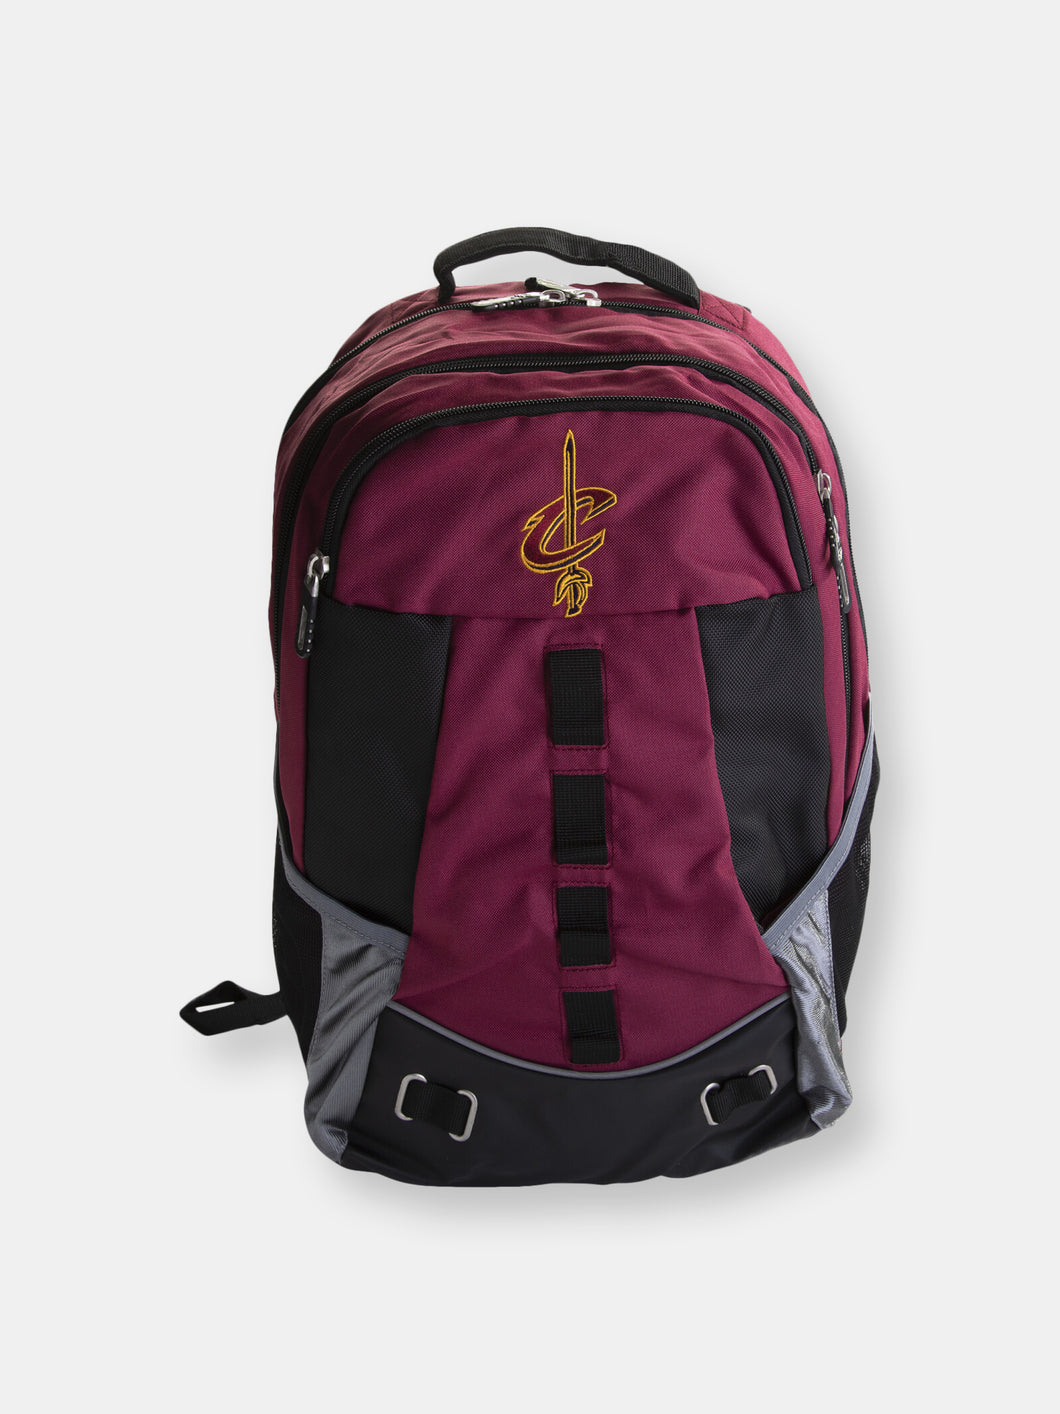 The Northwest Company Nba Cleveland Cavaliers Personnel Backpack